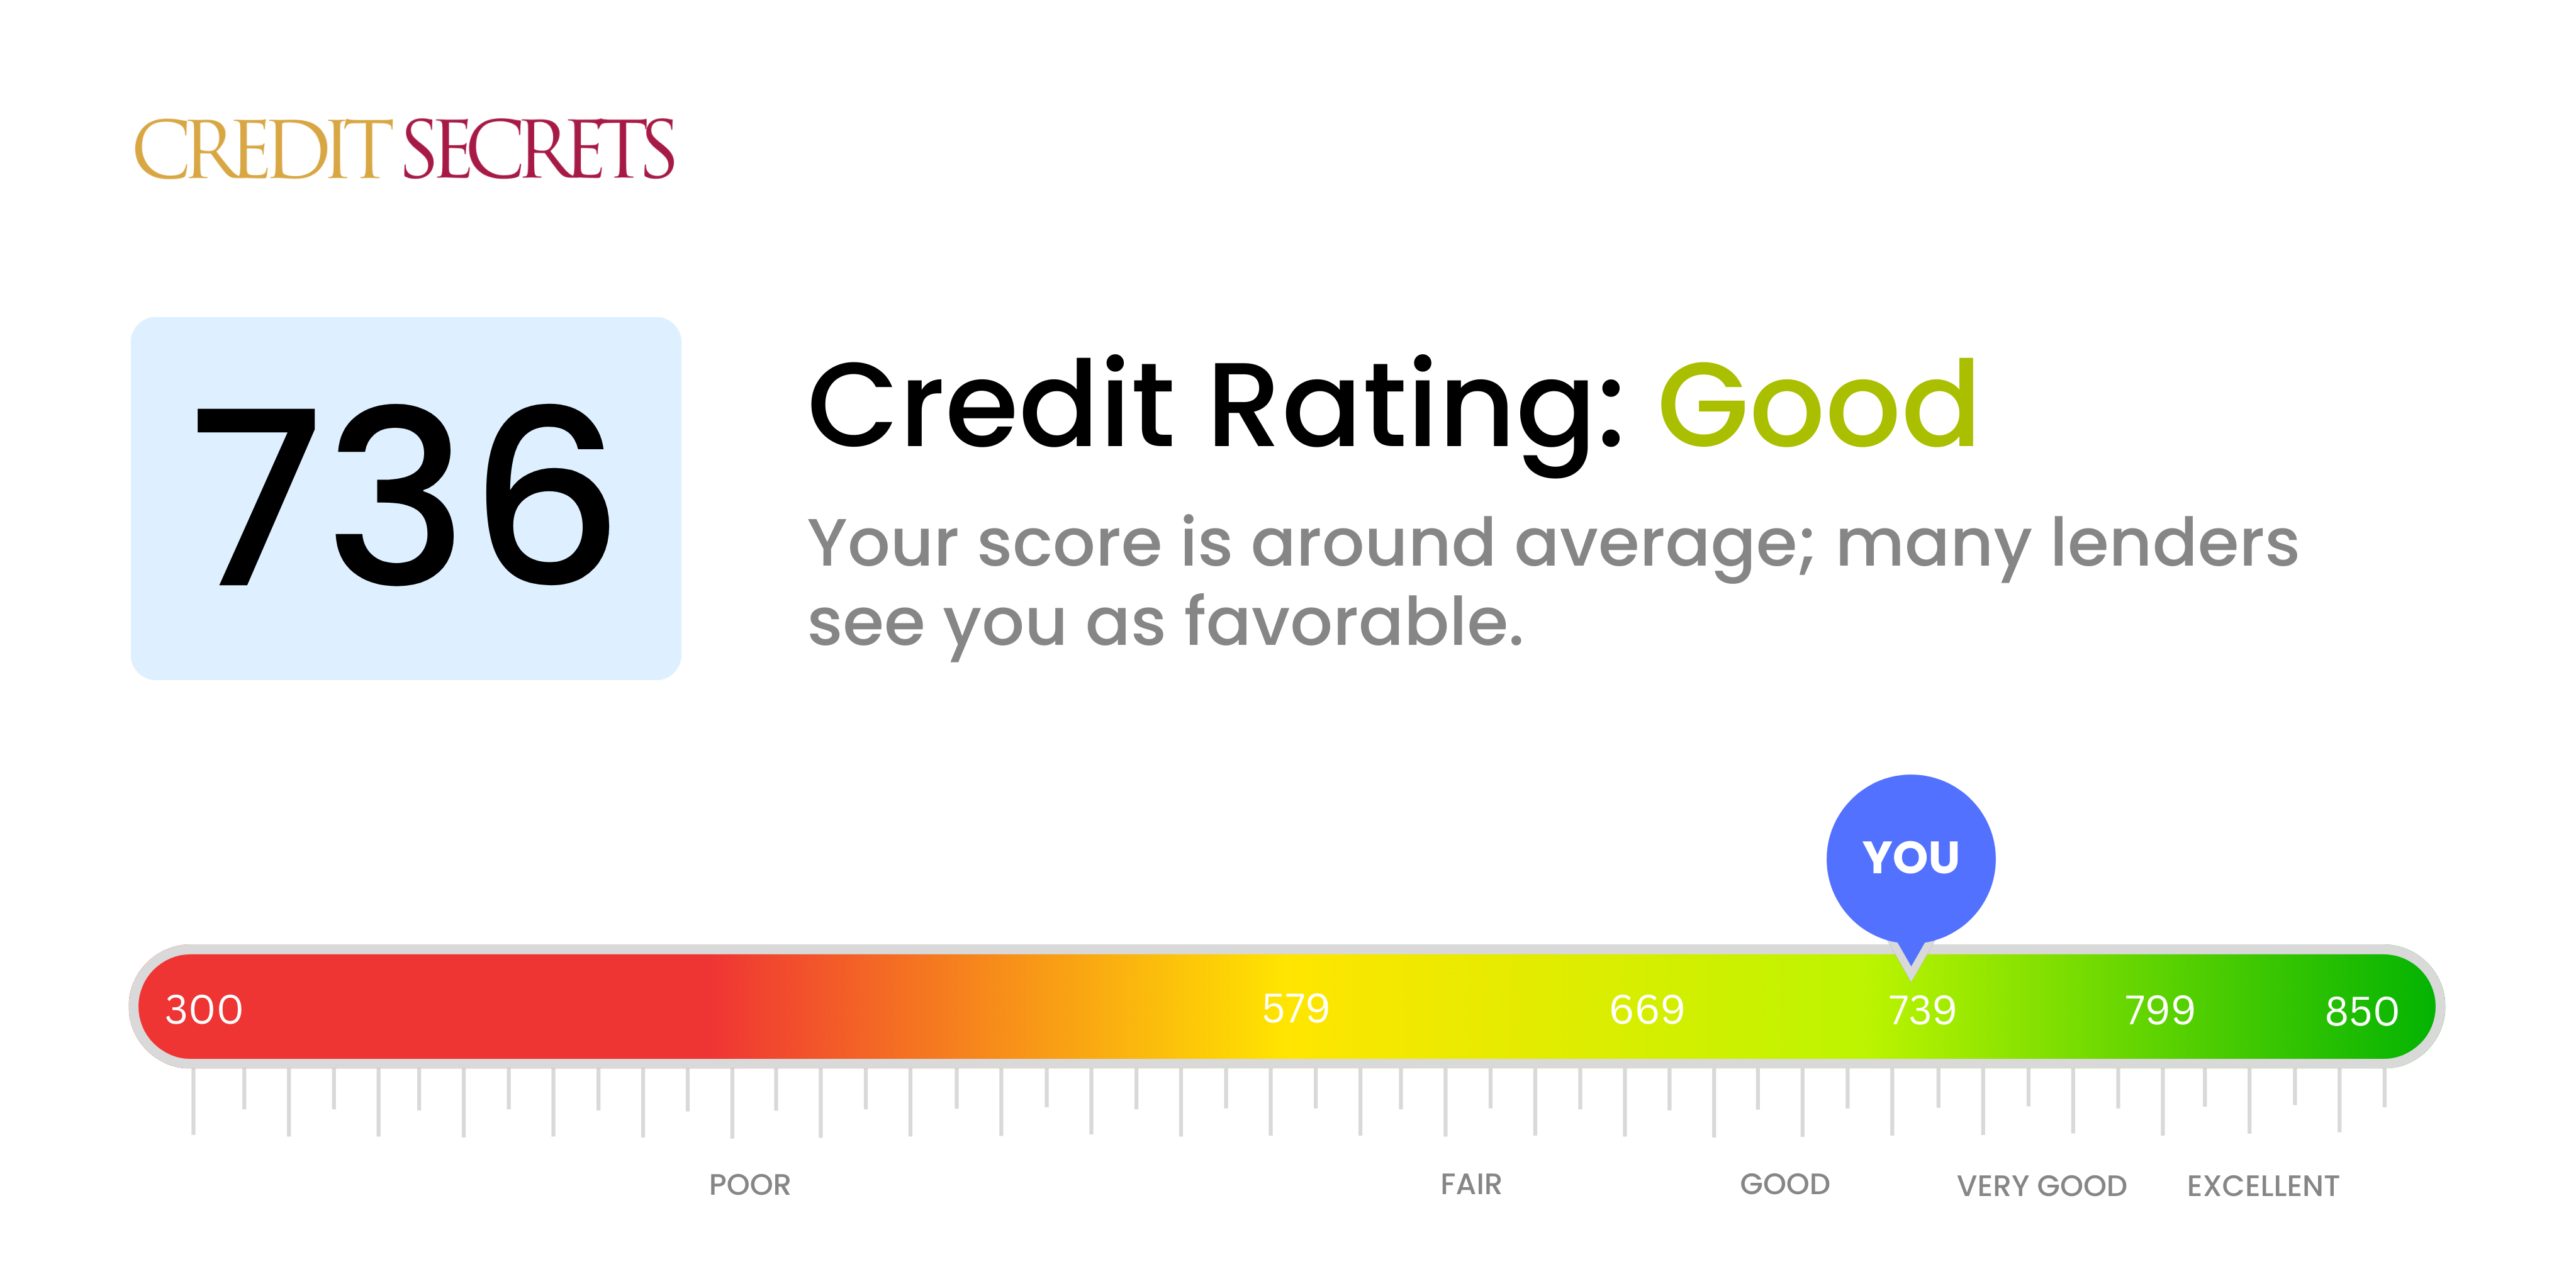 Is 736 a good credit score?